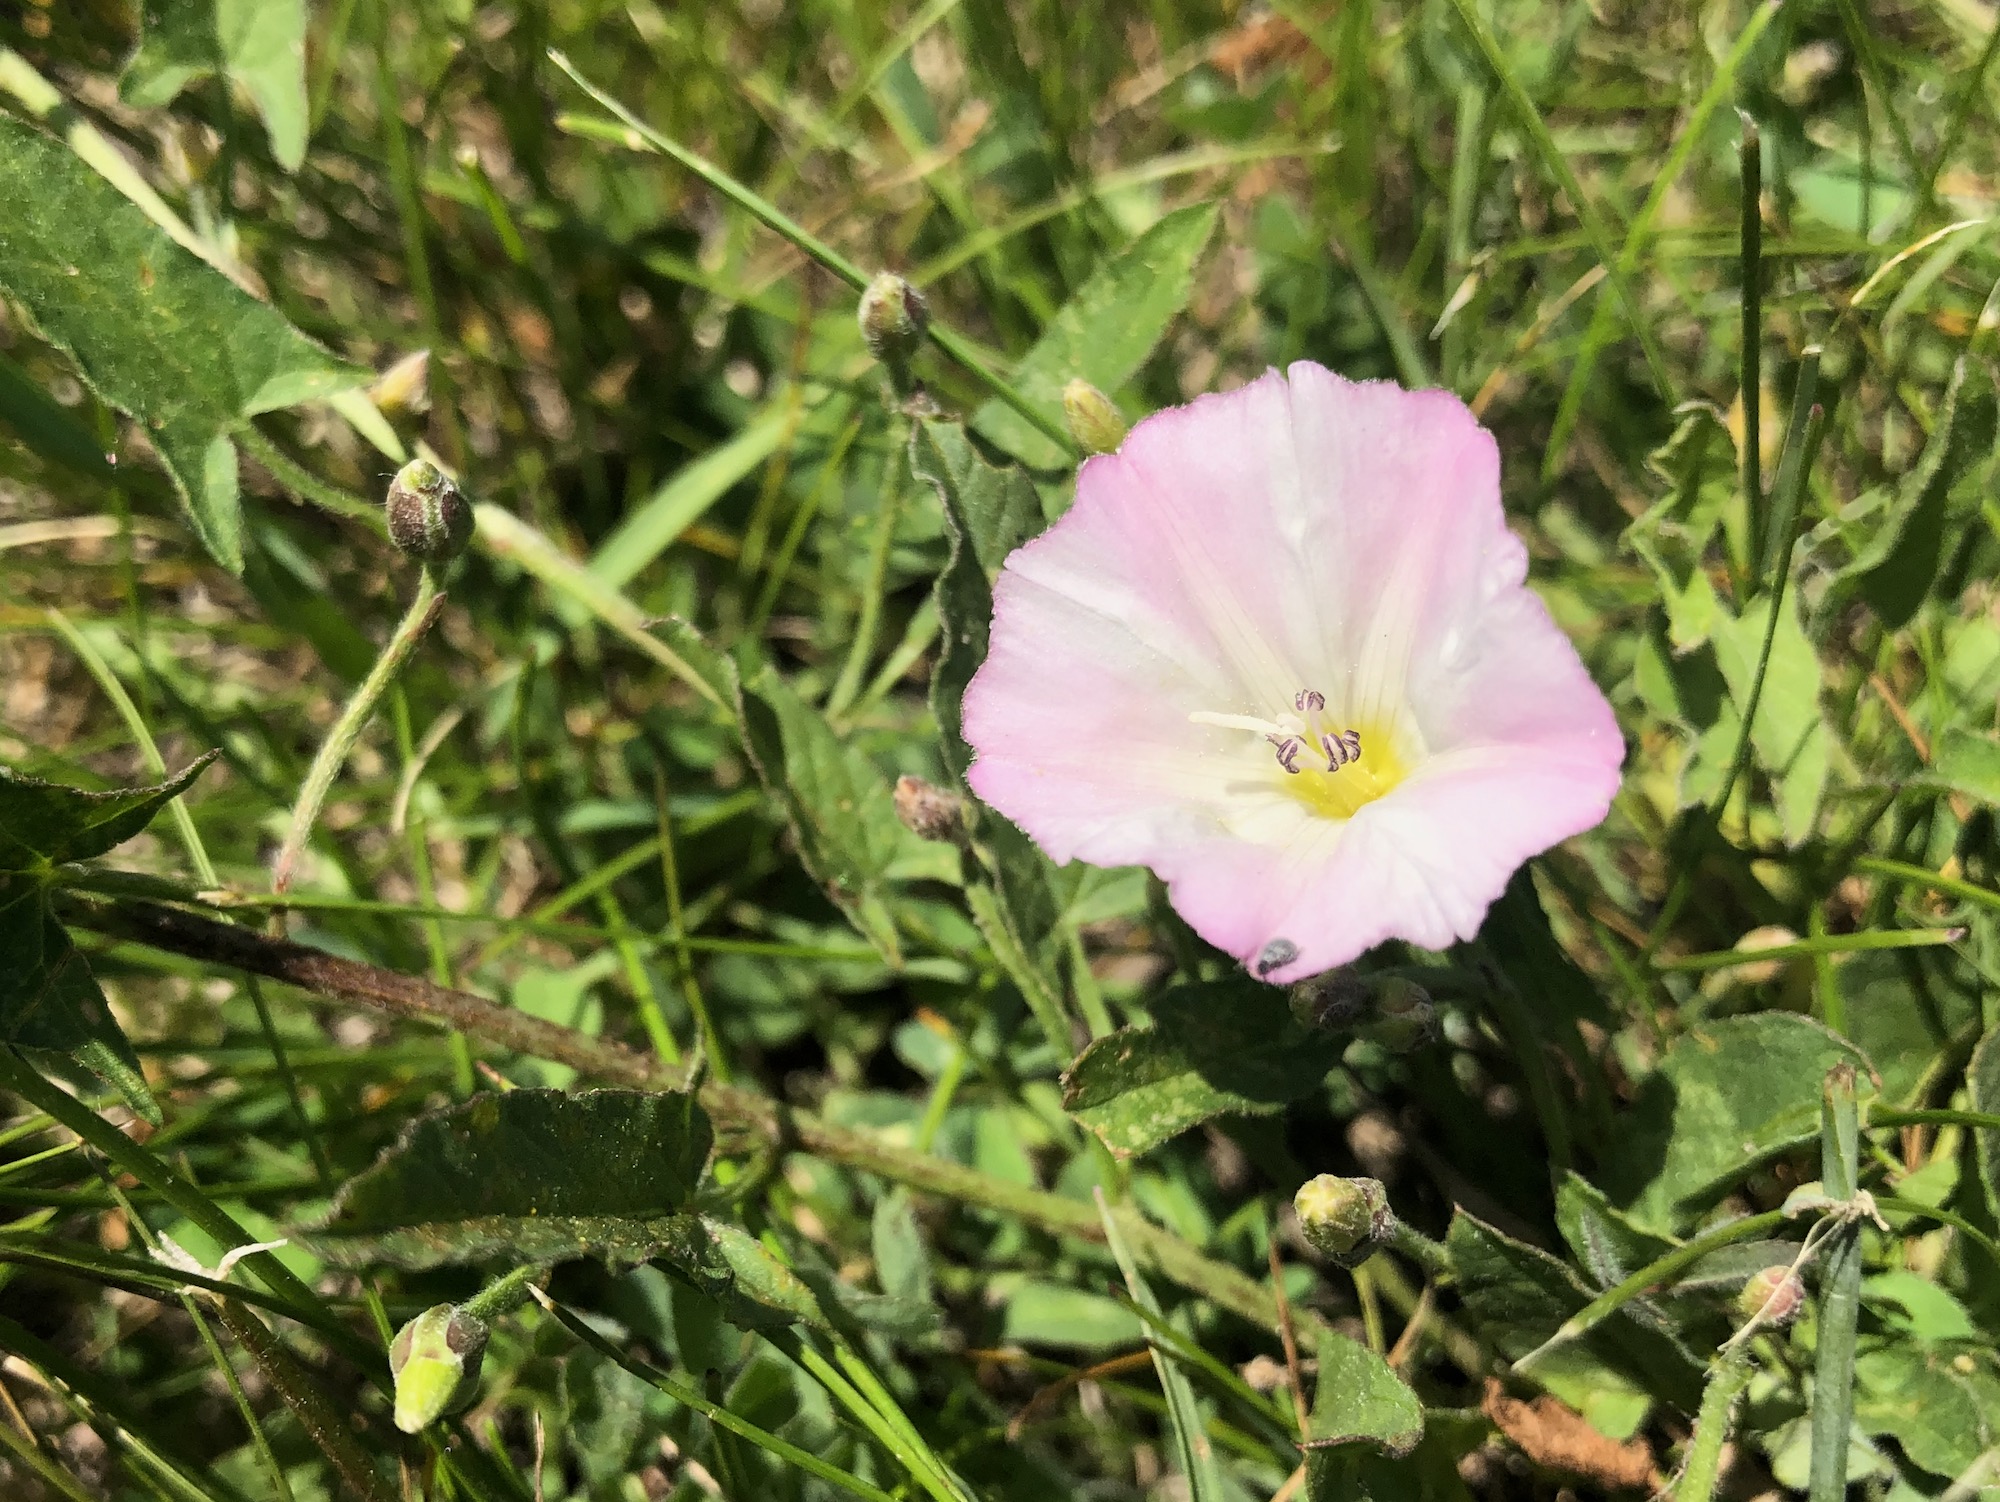 Field Bindweed by UW Arbortetum service road by Visitors Center in Madison, Wisconsin on June 3, 2021.